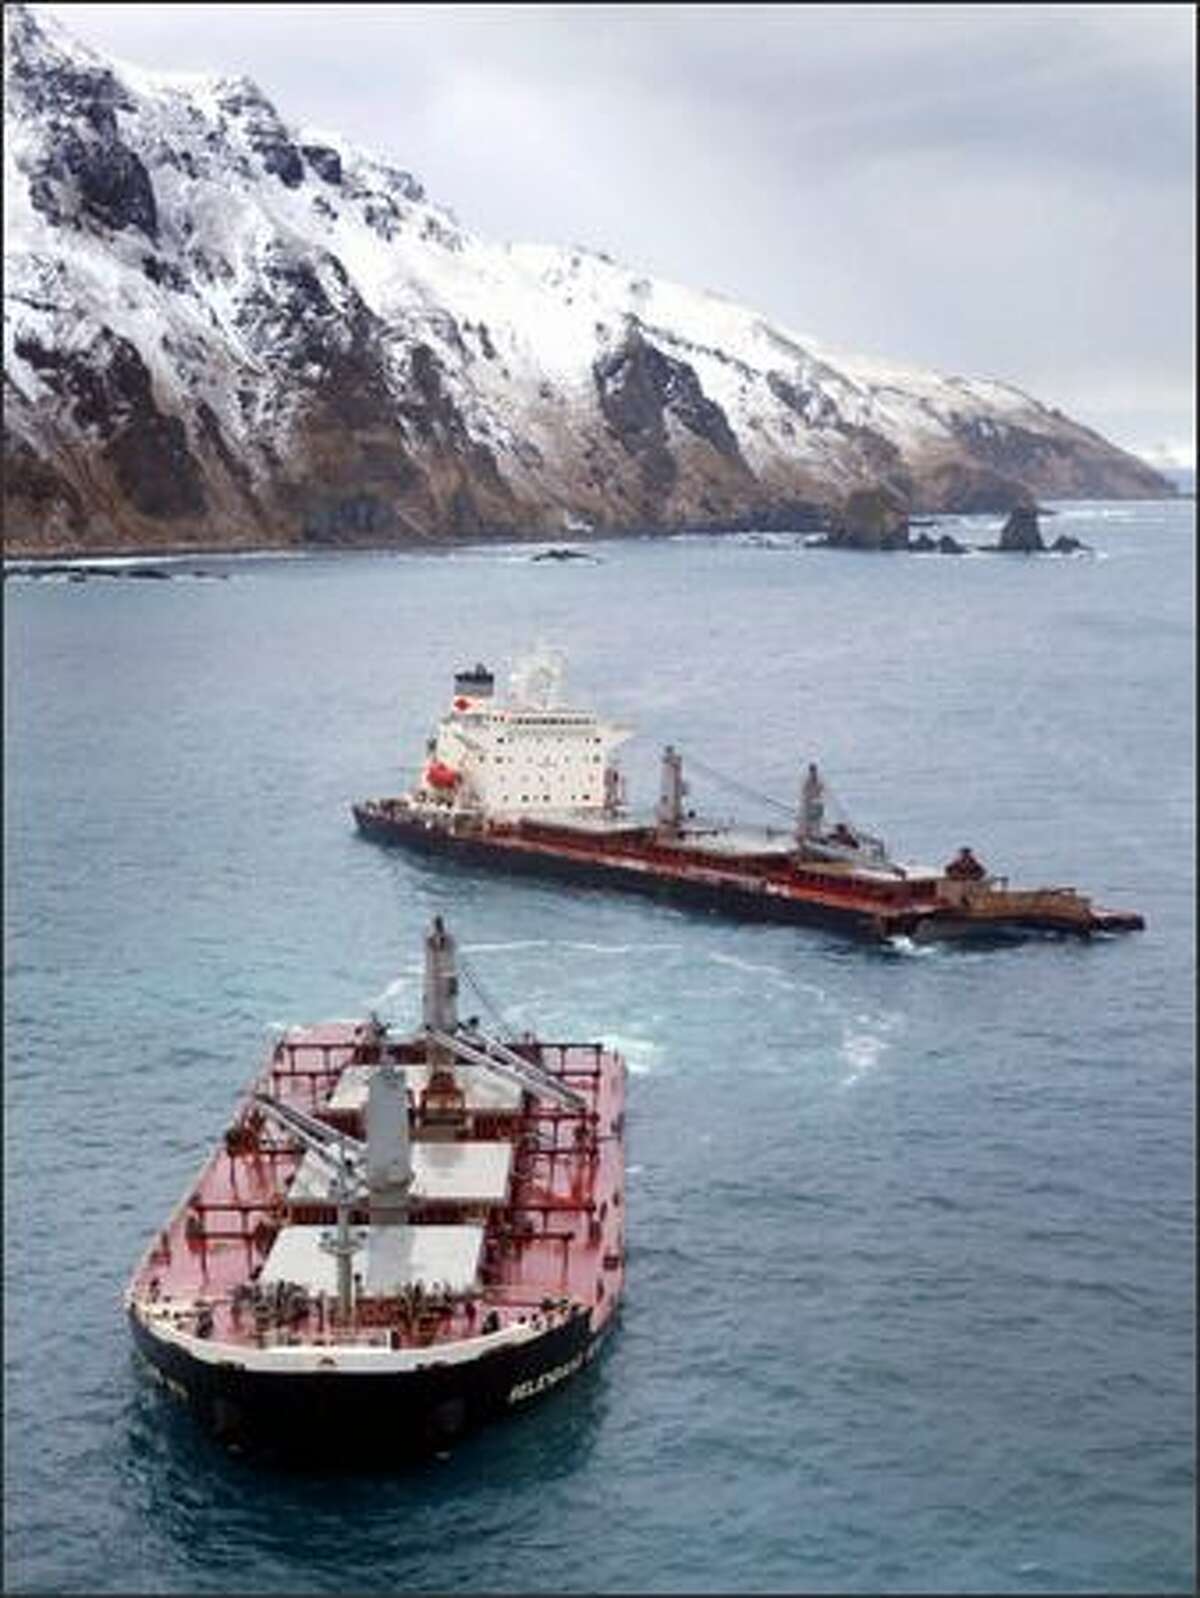 The Selendang Ayu sits near Skan Bay yesterday near Dutch Harbor, Alaska. The ship ran aground and spilled bunker fuel. Six crew members died.